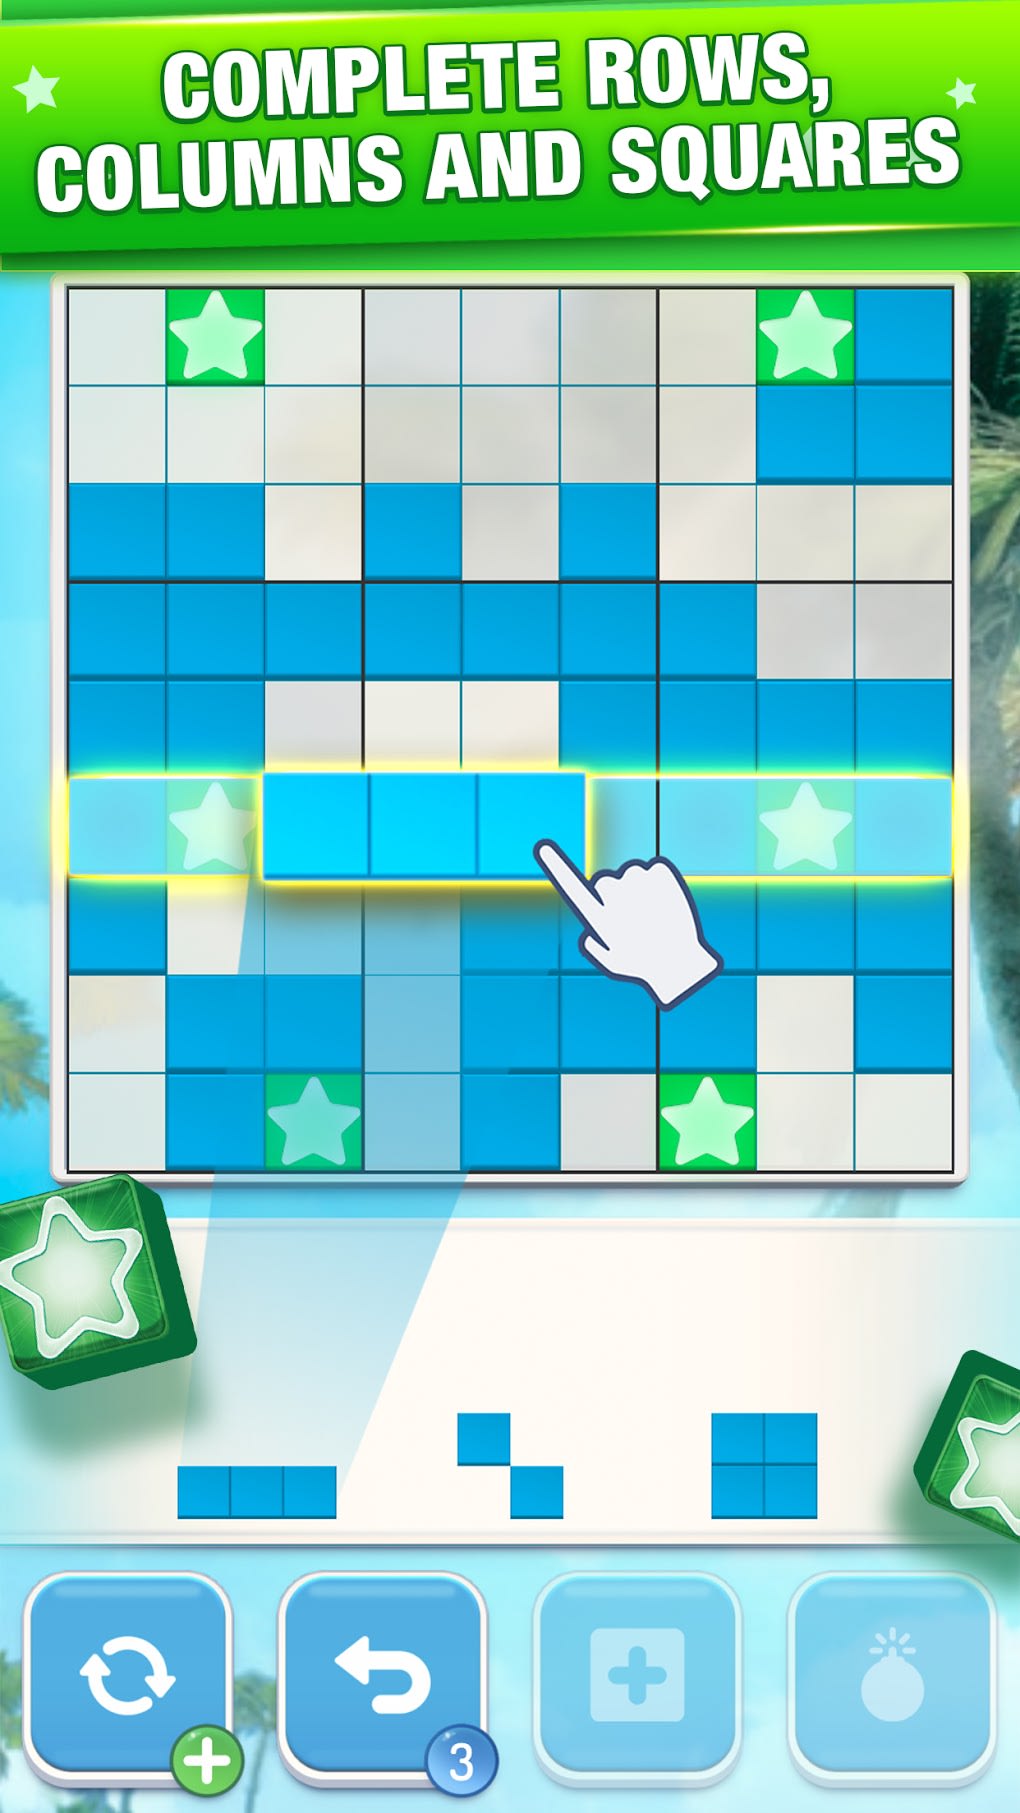 Tetra Blocks - Online Game - Play for Free